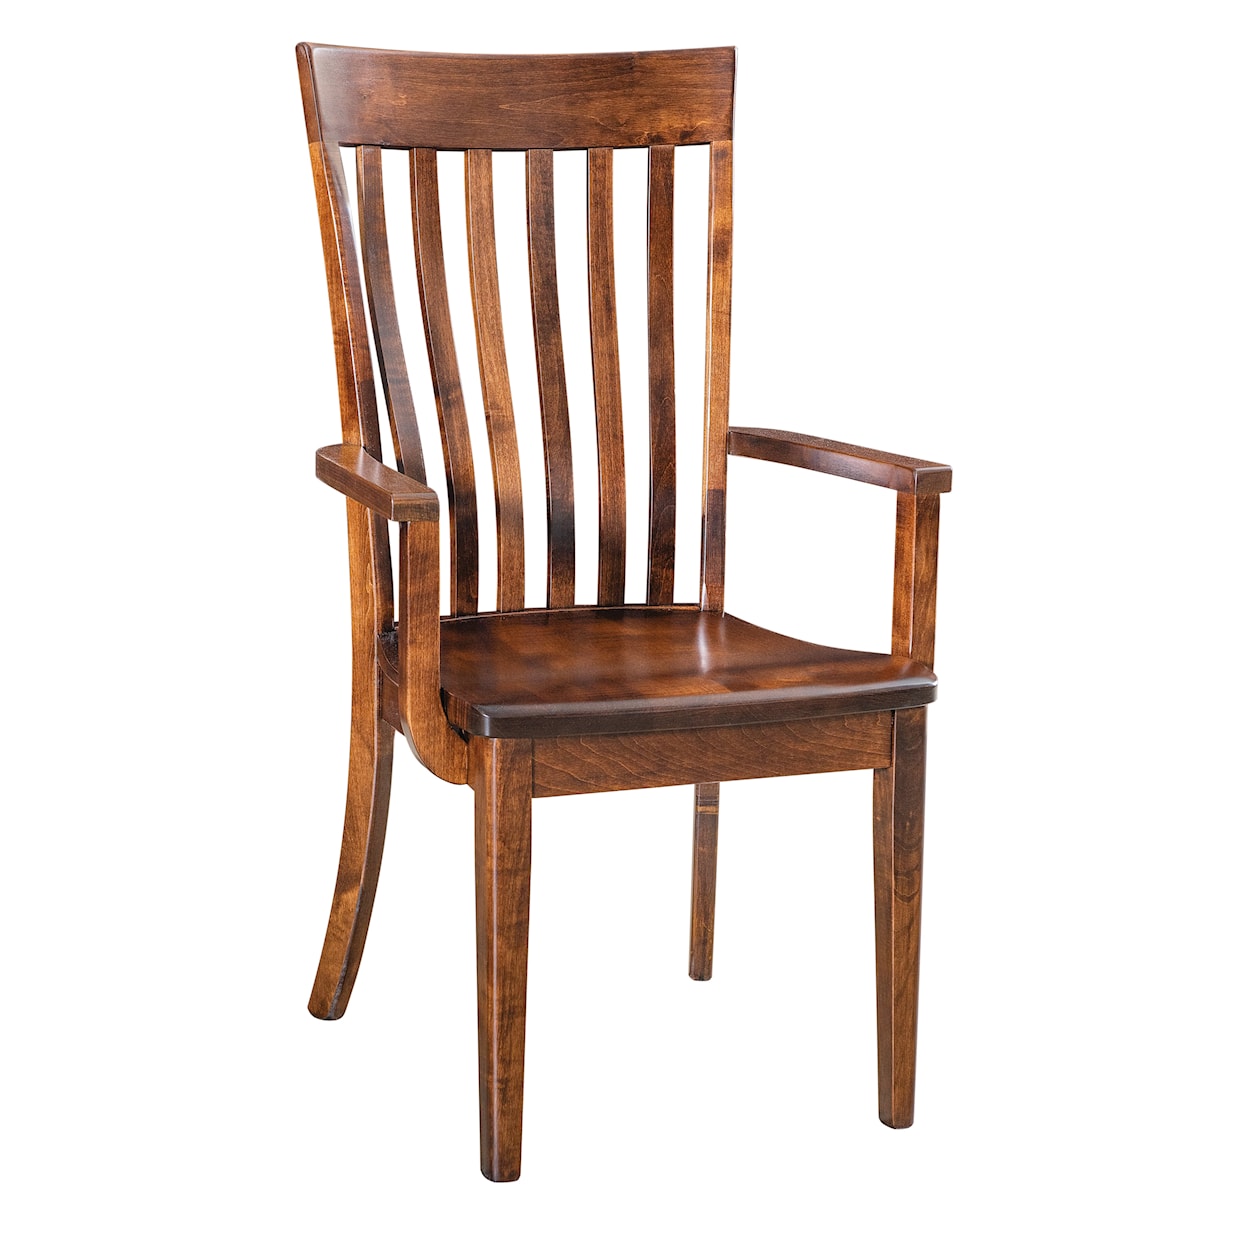 Archbold Furniture Amish Essentials Casual Dining Nathan Dining Arm Chair